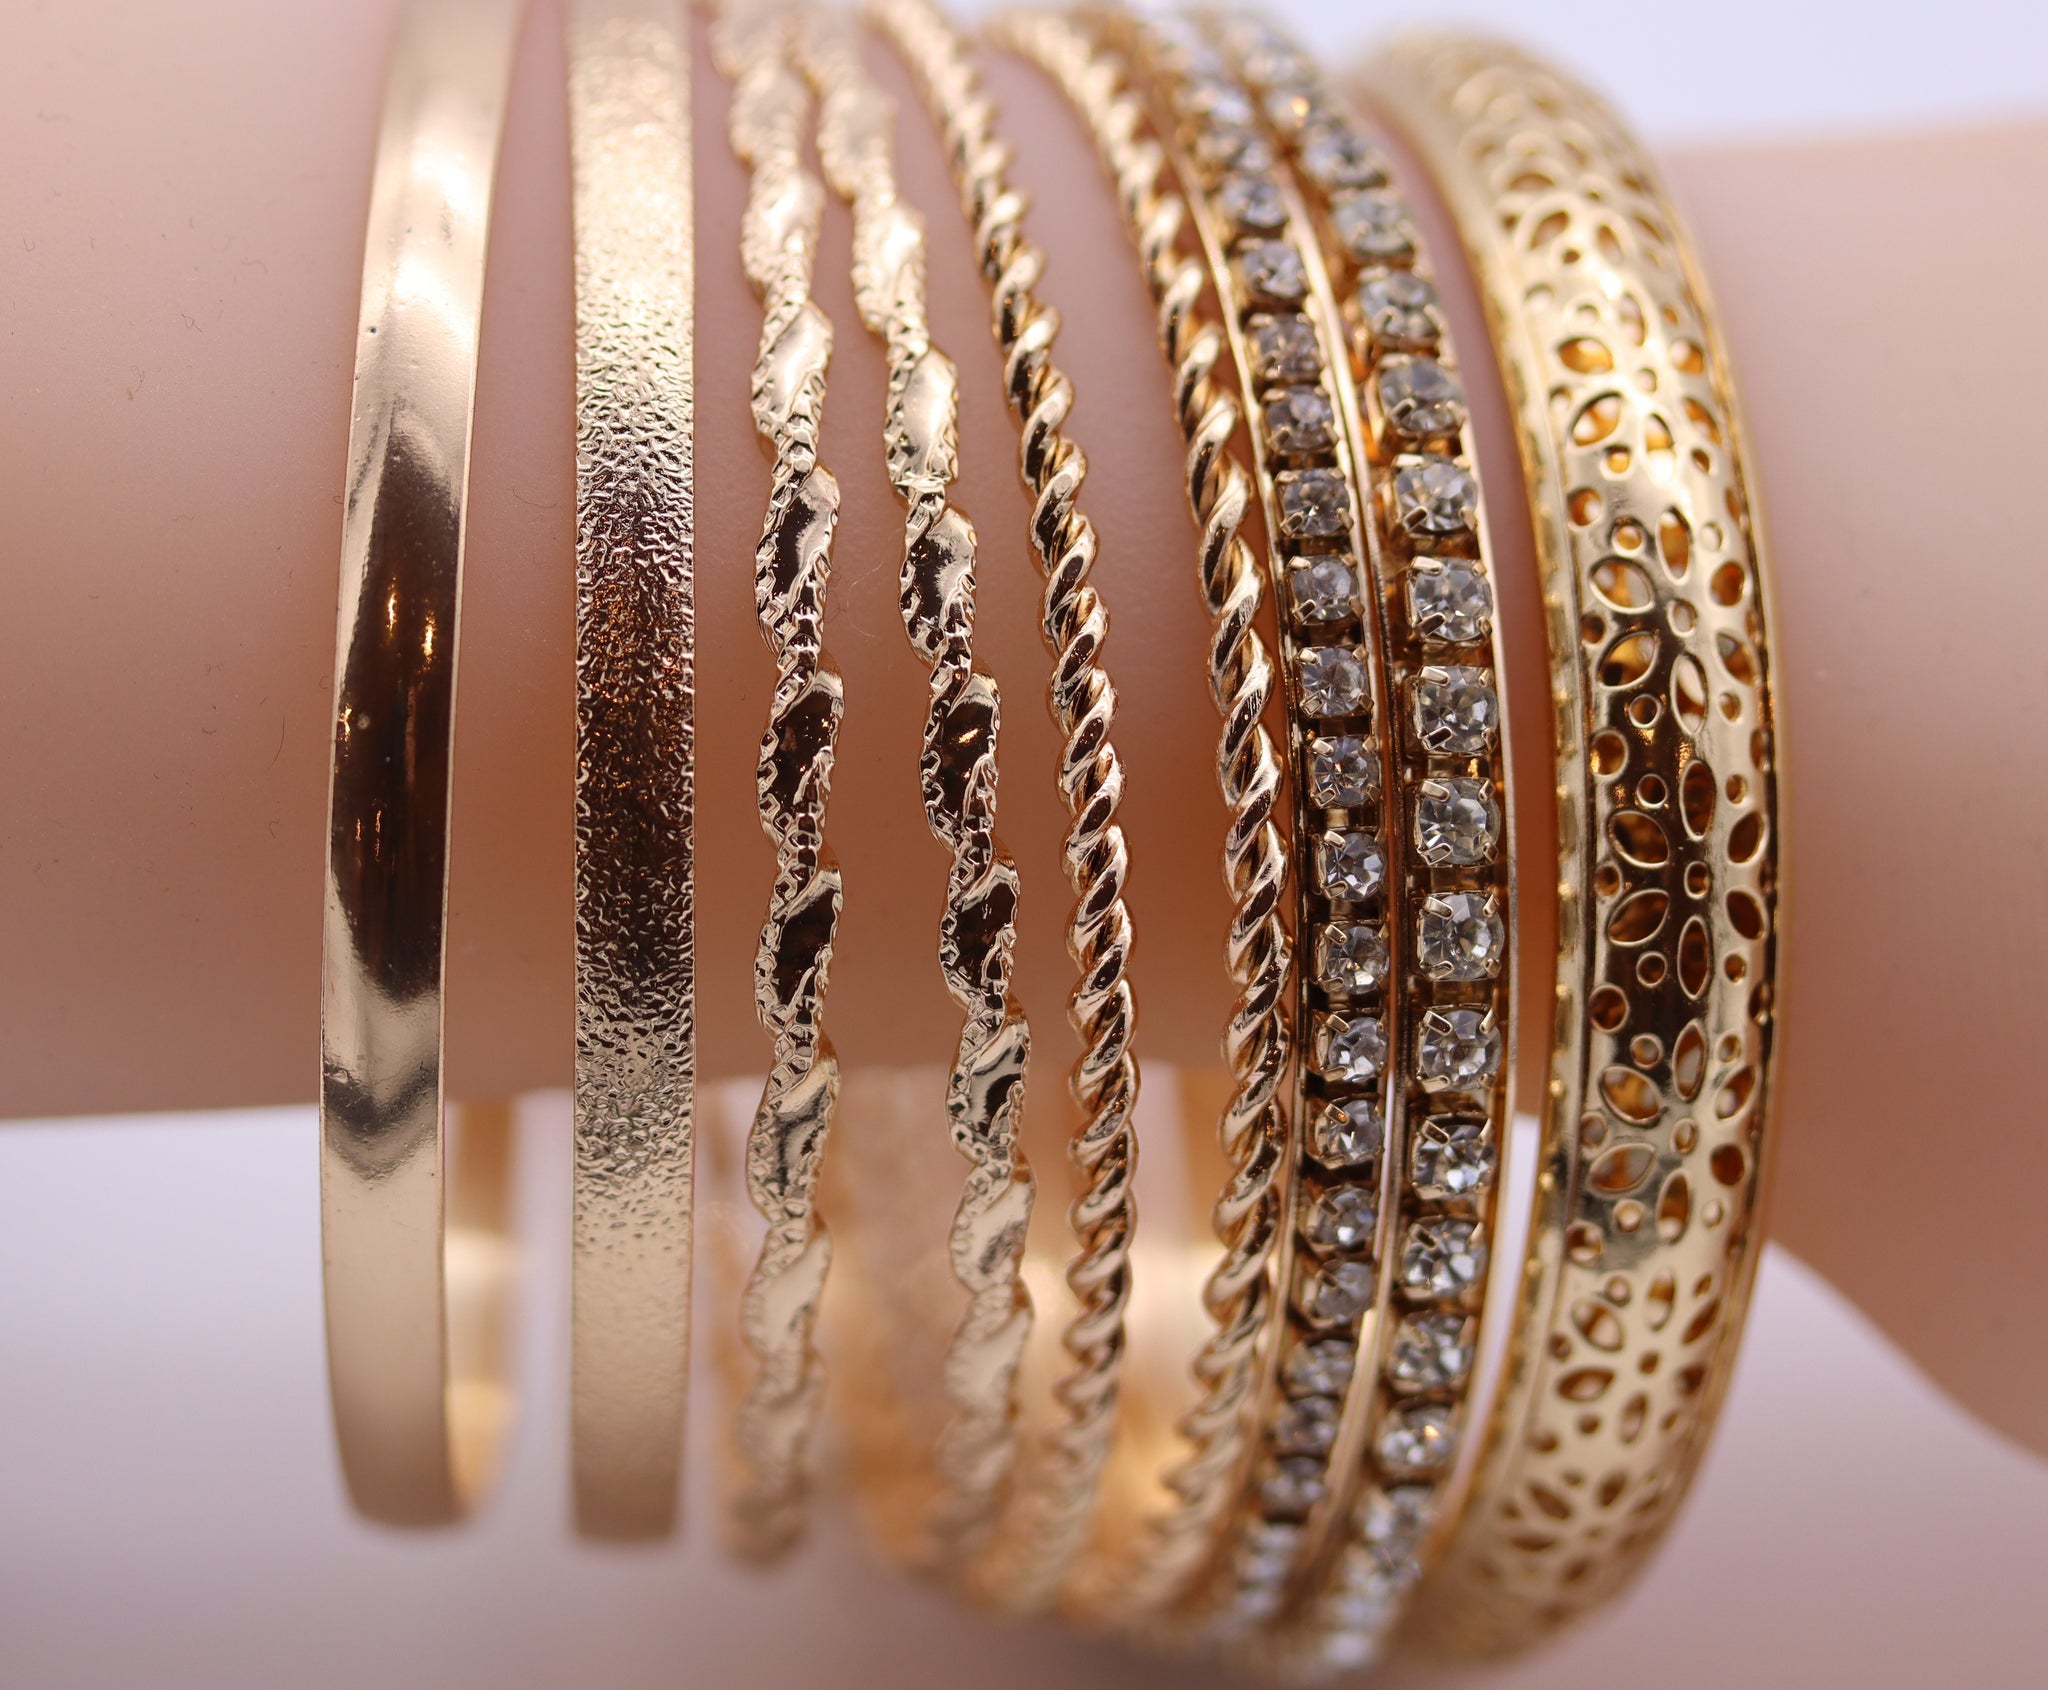 Multilayered 8 pieces Bangles Set - Gold & Silver Options